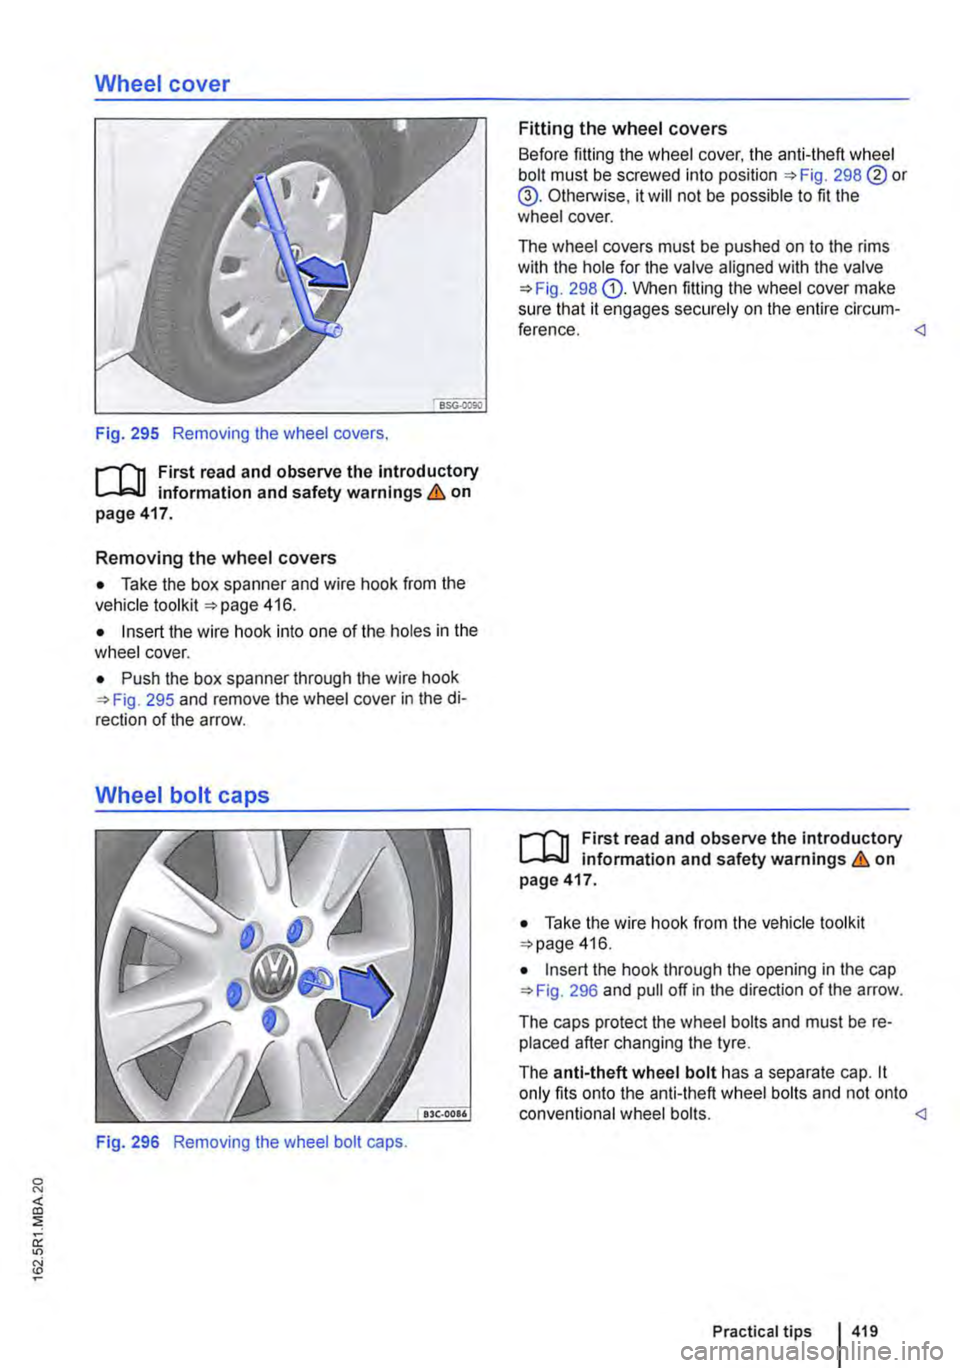 VOLKSWAGEN TRANSPORTER 2013  Owners Manual Wheel cover 
Fig. 295 Removing the wheel covers. 
r-f"n First read and observe the Introductory information and safety warnings & on page 417. 
Removing the wheel covers 
• Take the box spanner and 